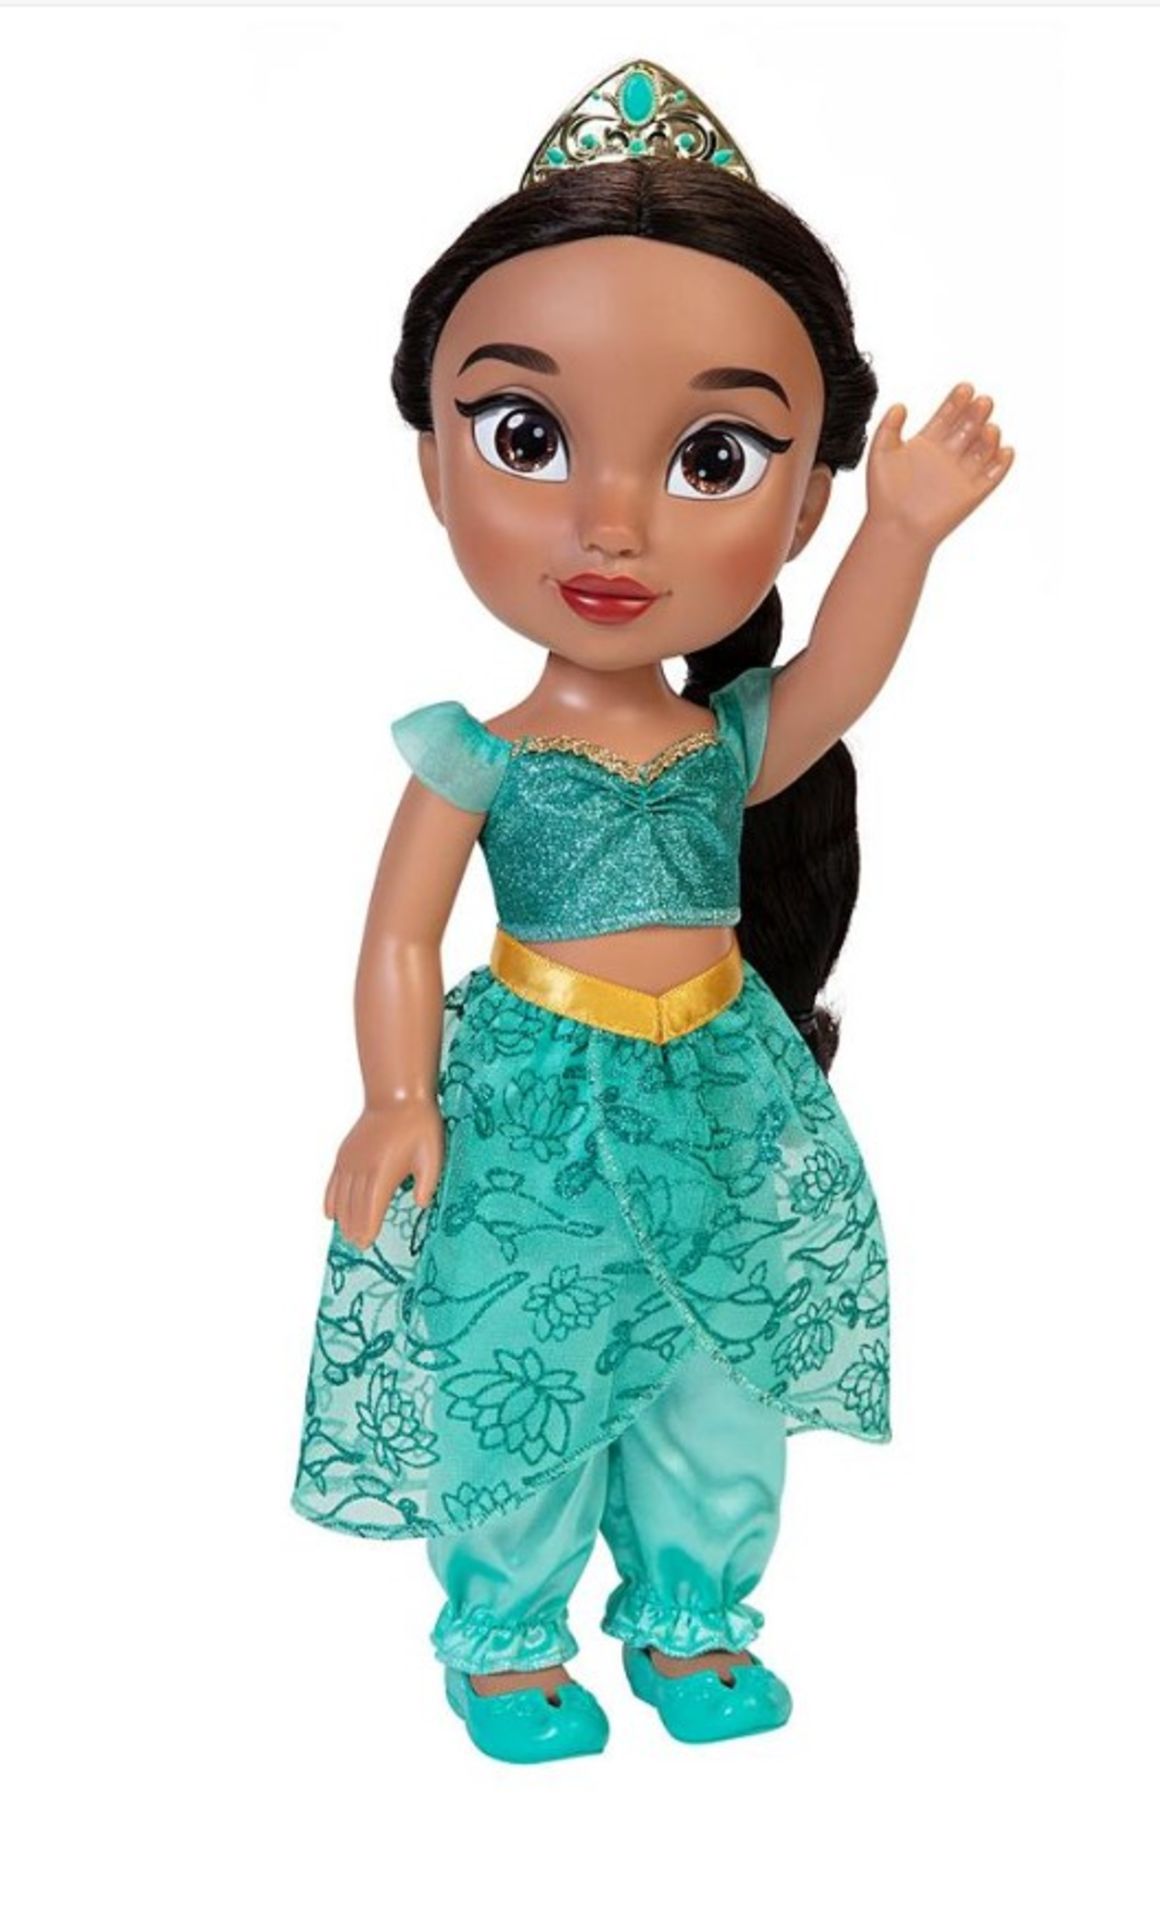 Disney Princess Jasmine Toddler Doll. - ER22. For every girl who dreams of adventure, there's a